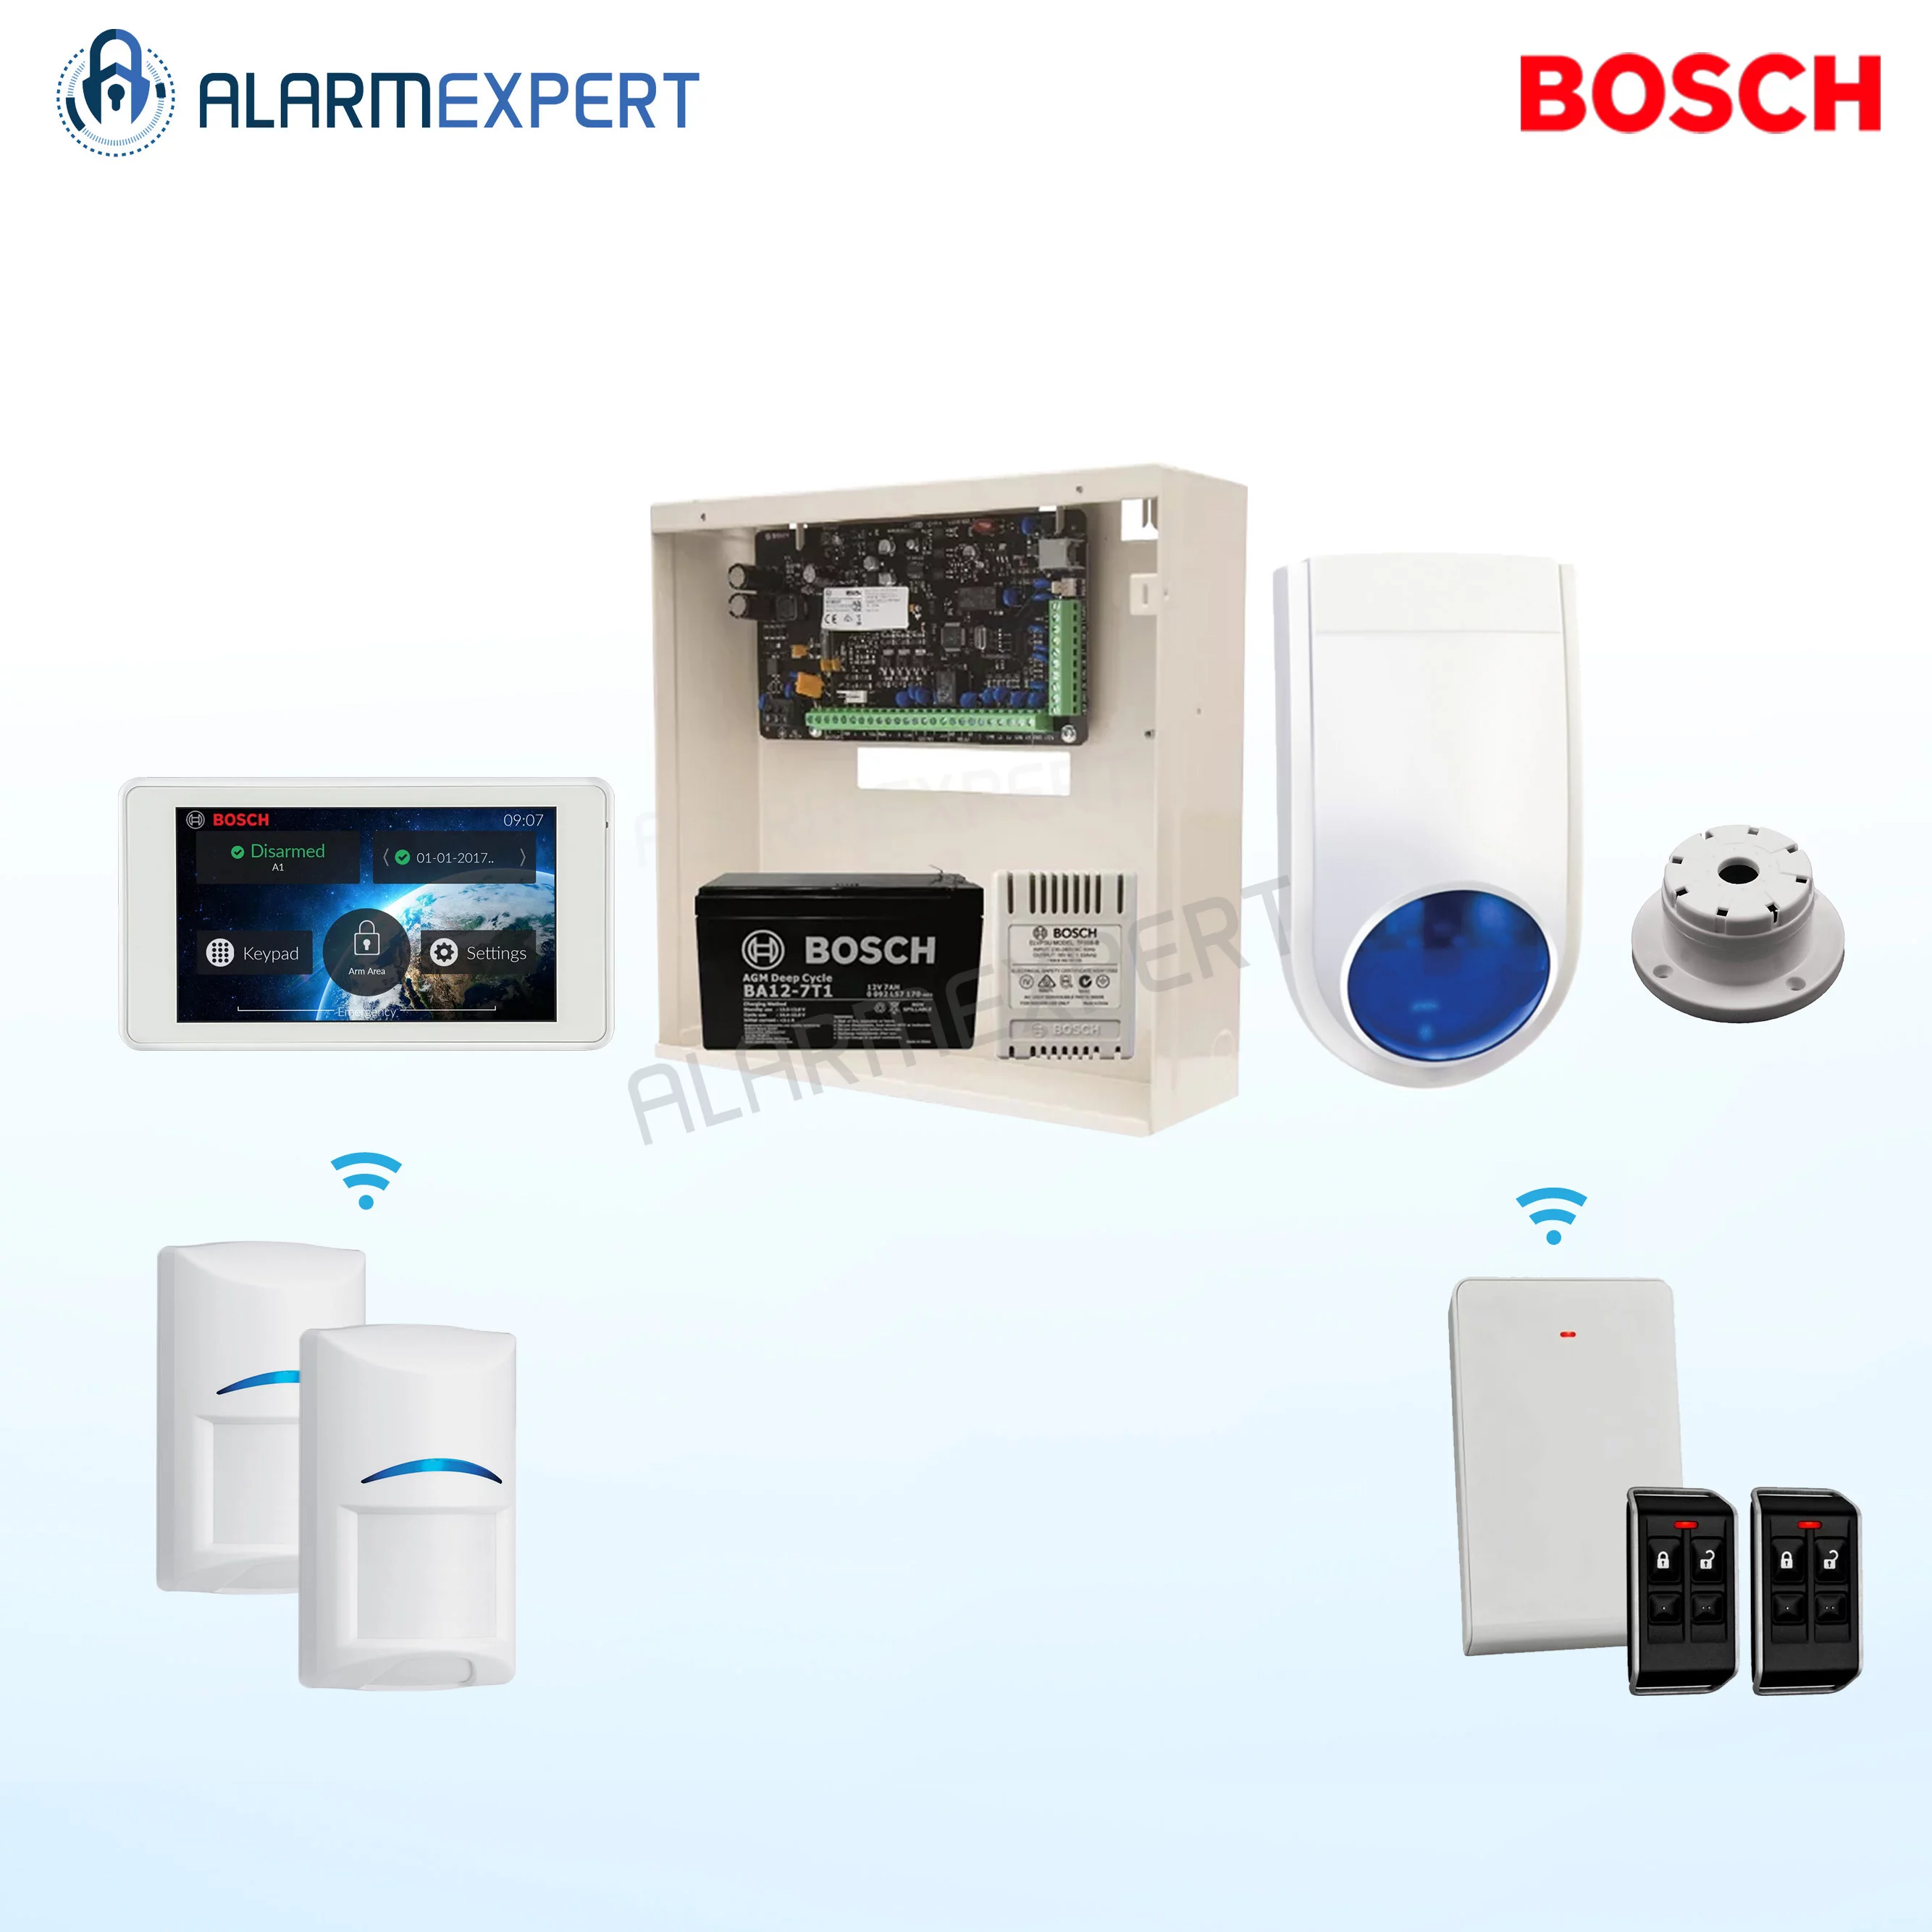 Bosch Solution 3000 + 2 Wireless PIRs + 5" Touch screen Keypad + Receiver + 2 Deluxe Remotes